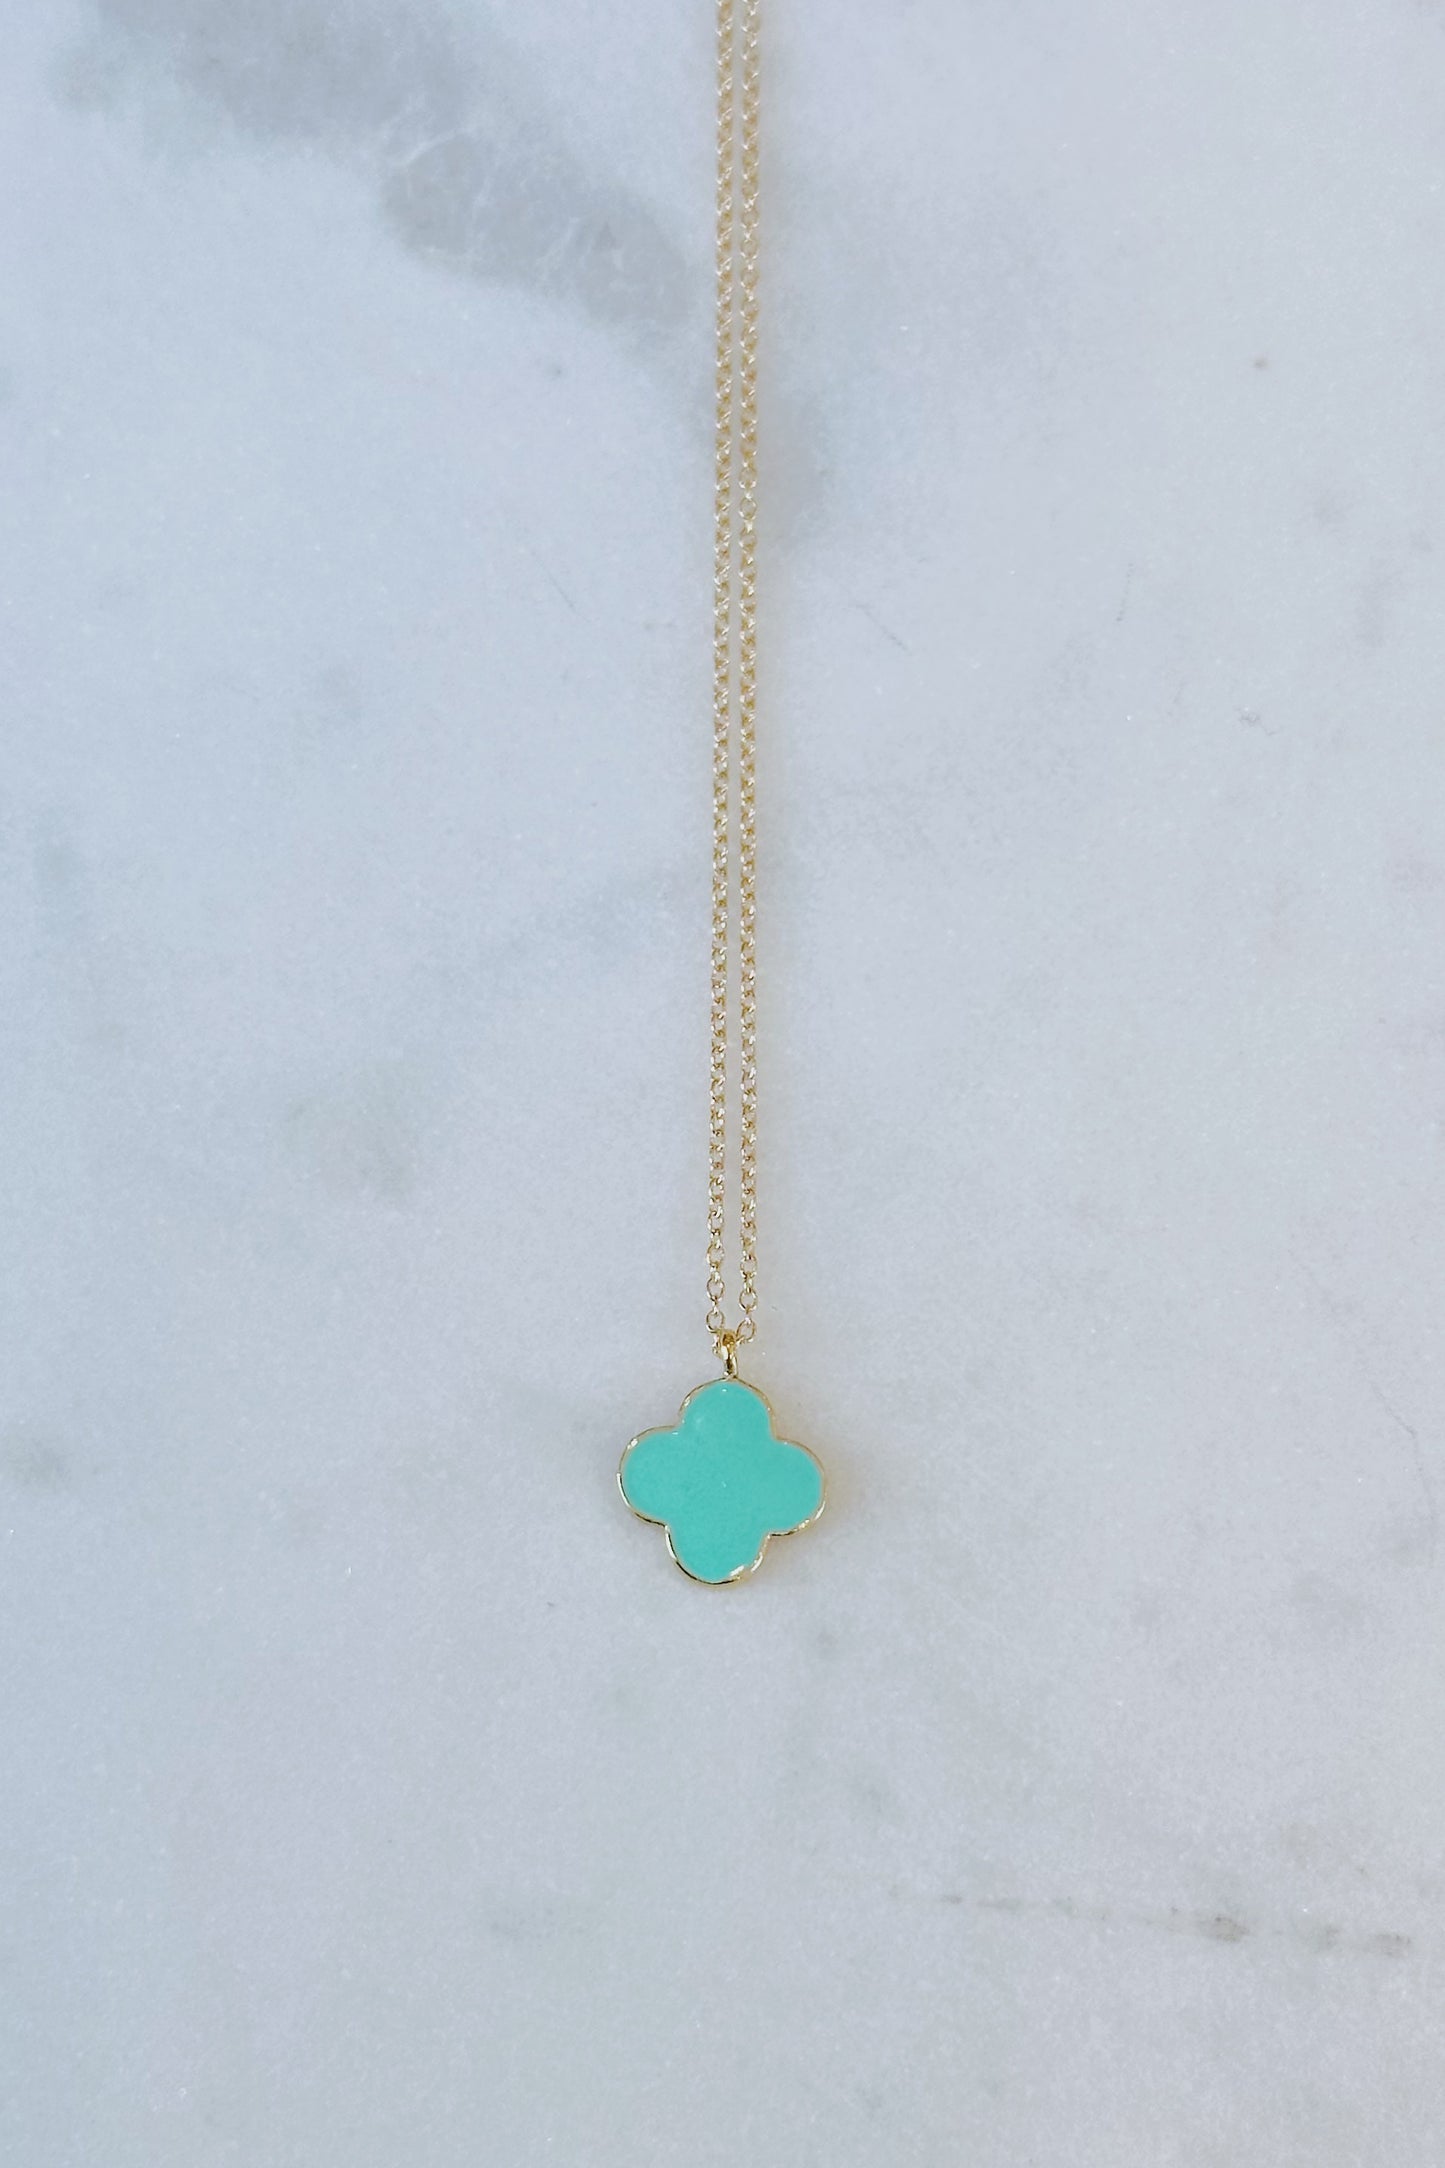 Gold clover charm necklace